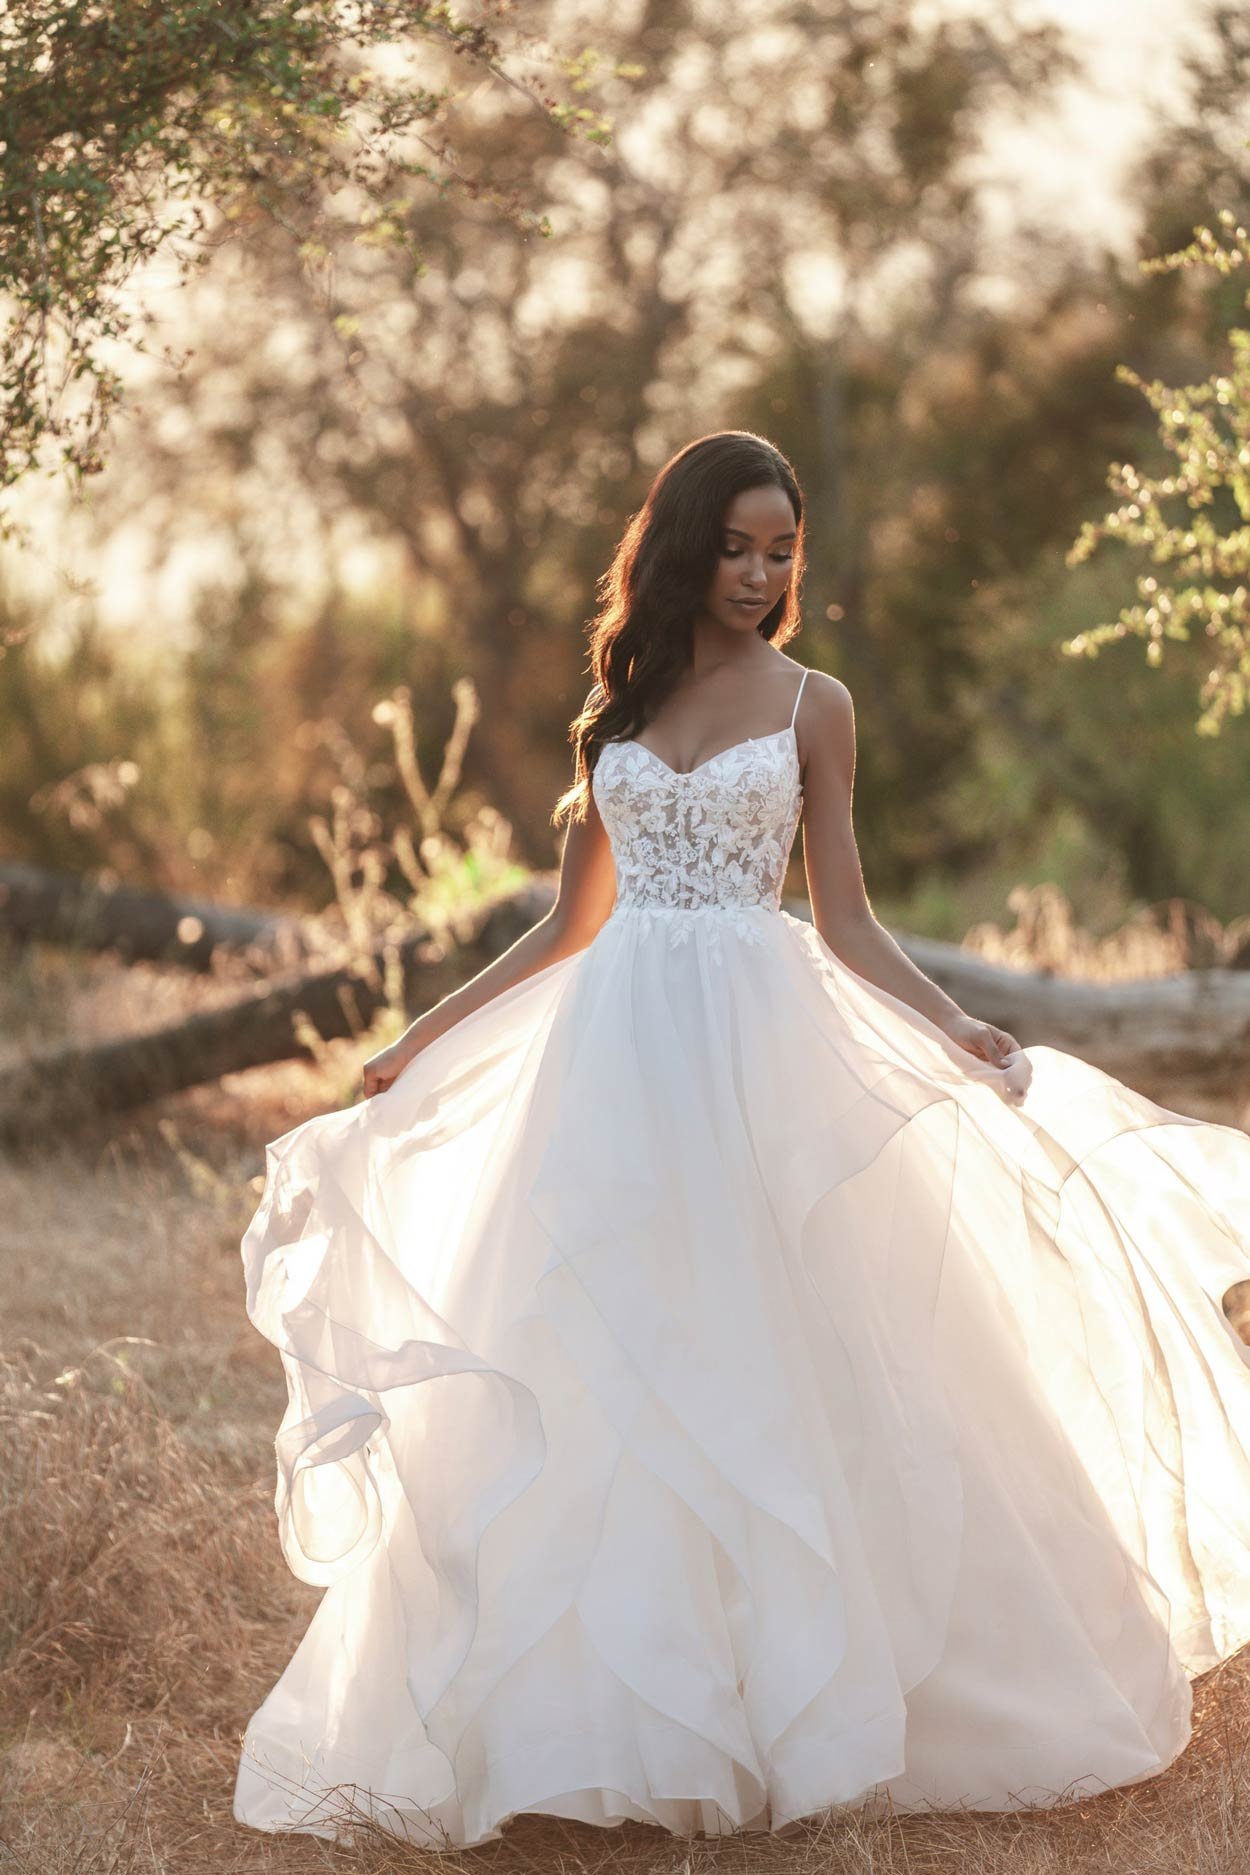 Opulent full ball gown wedding dresses from Allure Bridal's 2011 Couture  line